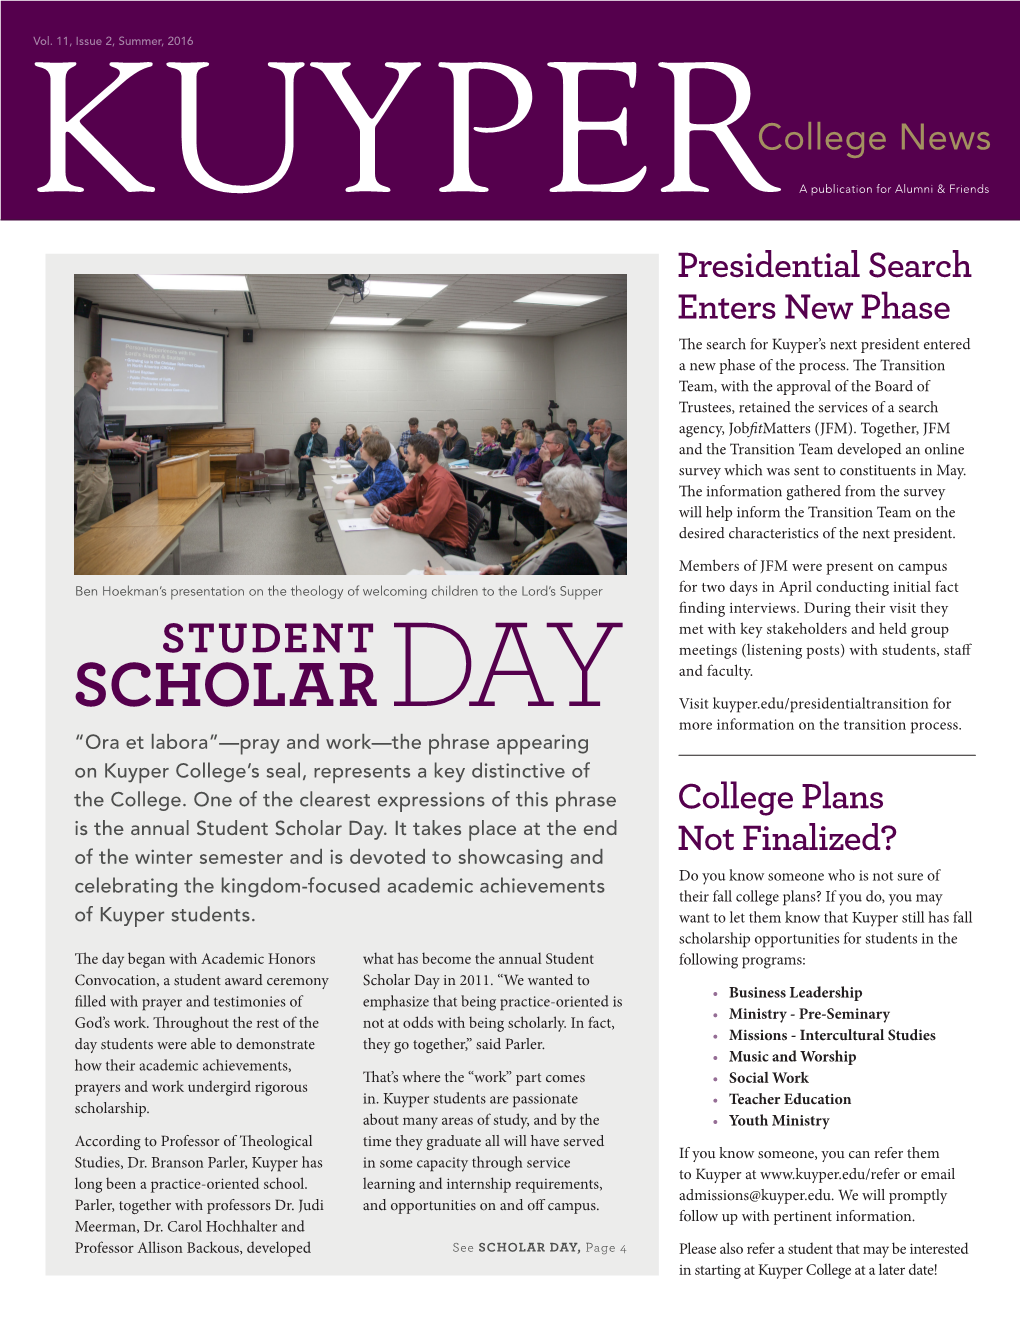 SCHOLAR Visit Kuyper.Edu/Presidentialtransition for DAY More Information on the Transition Process